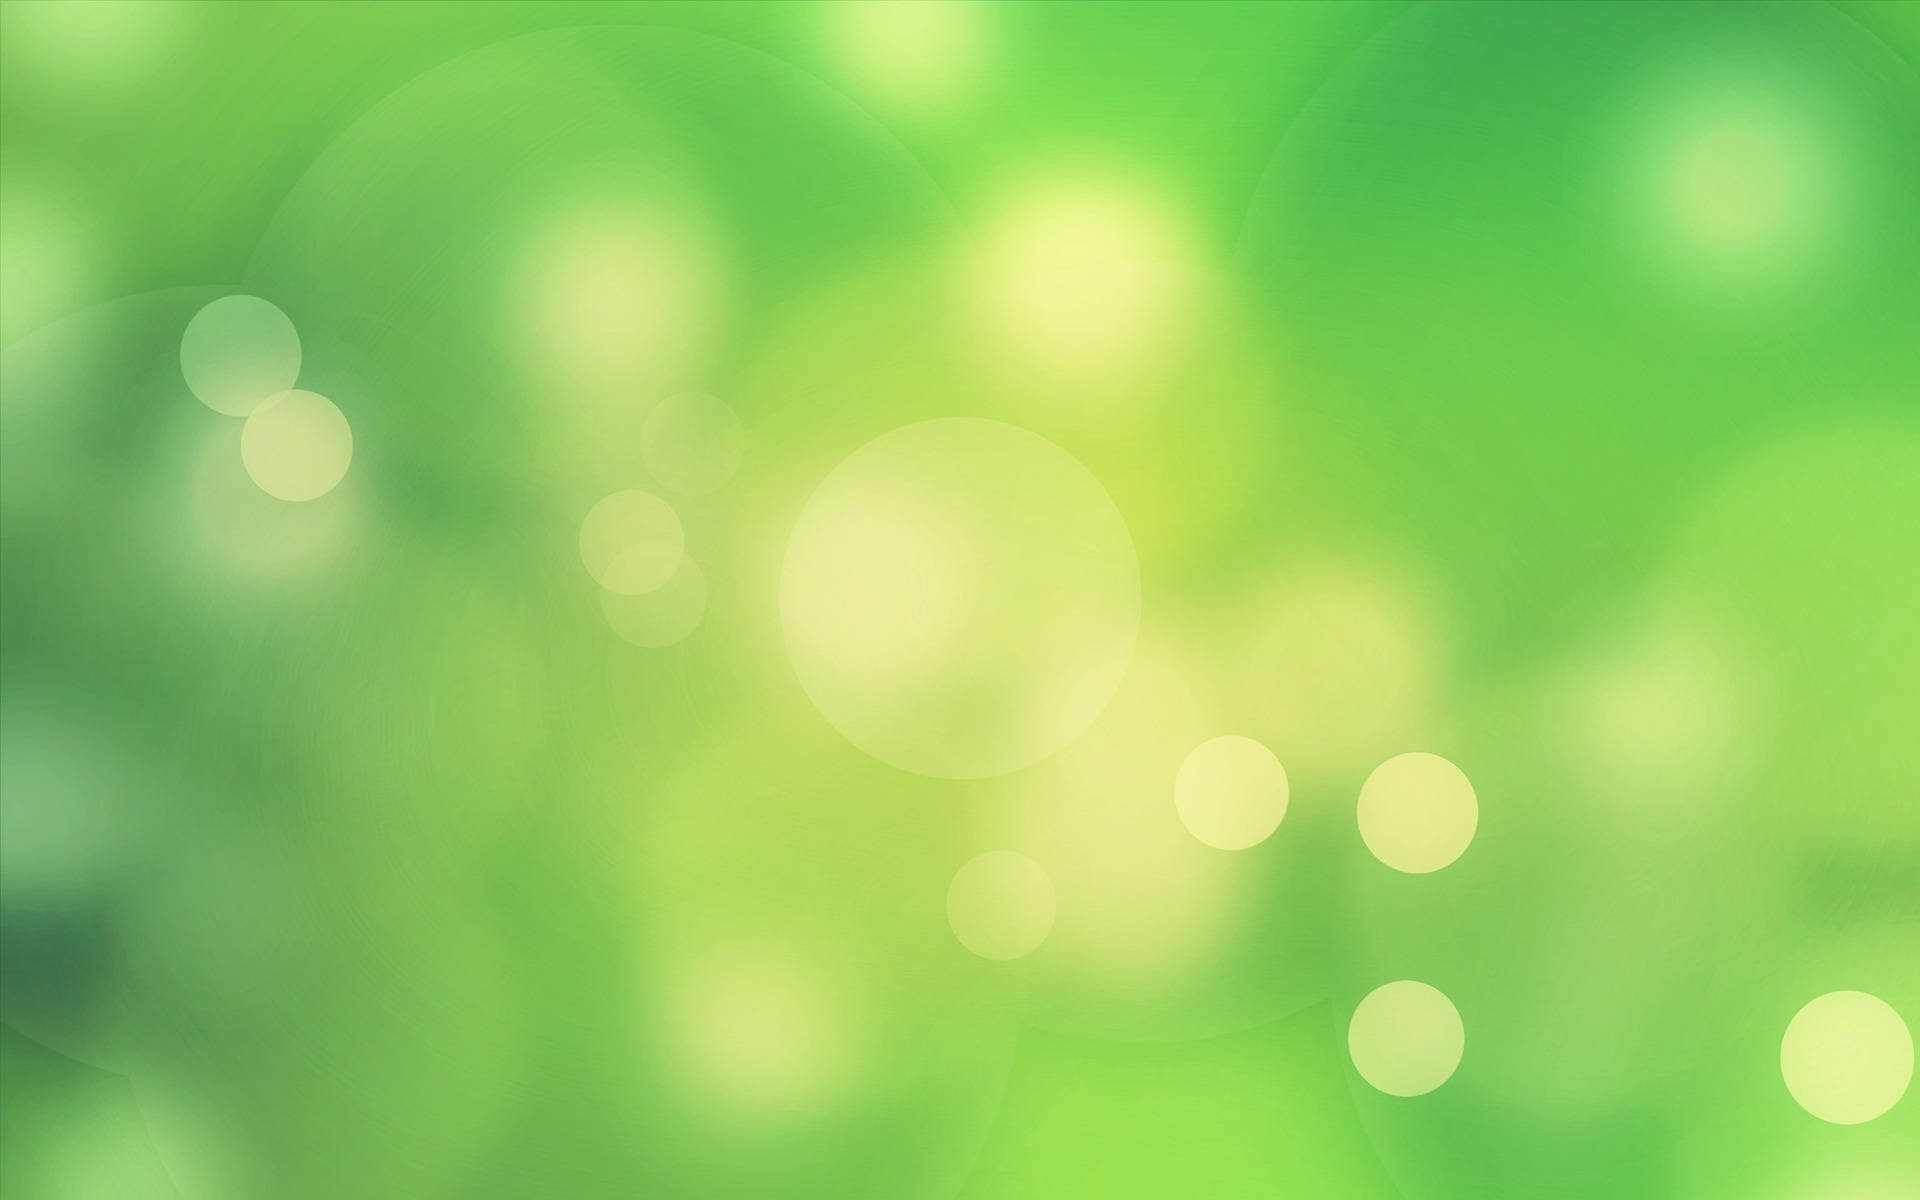 Caption: Energizing Green Abstract Design Background